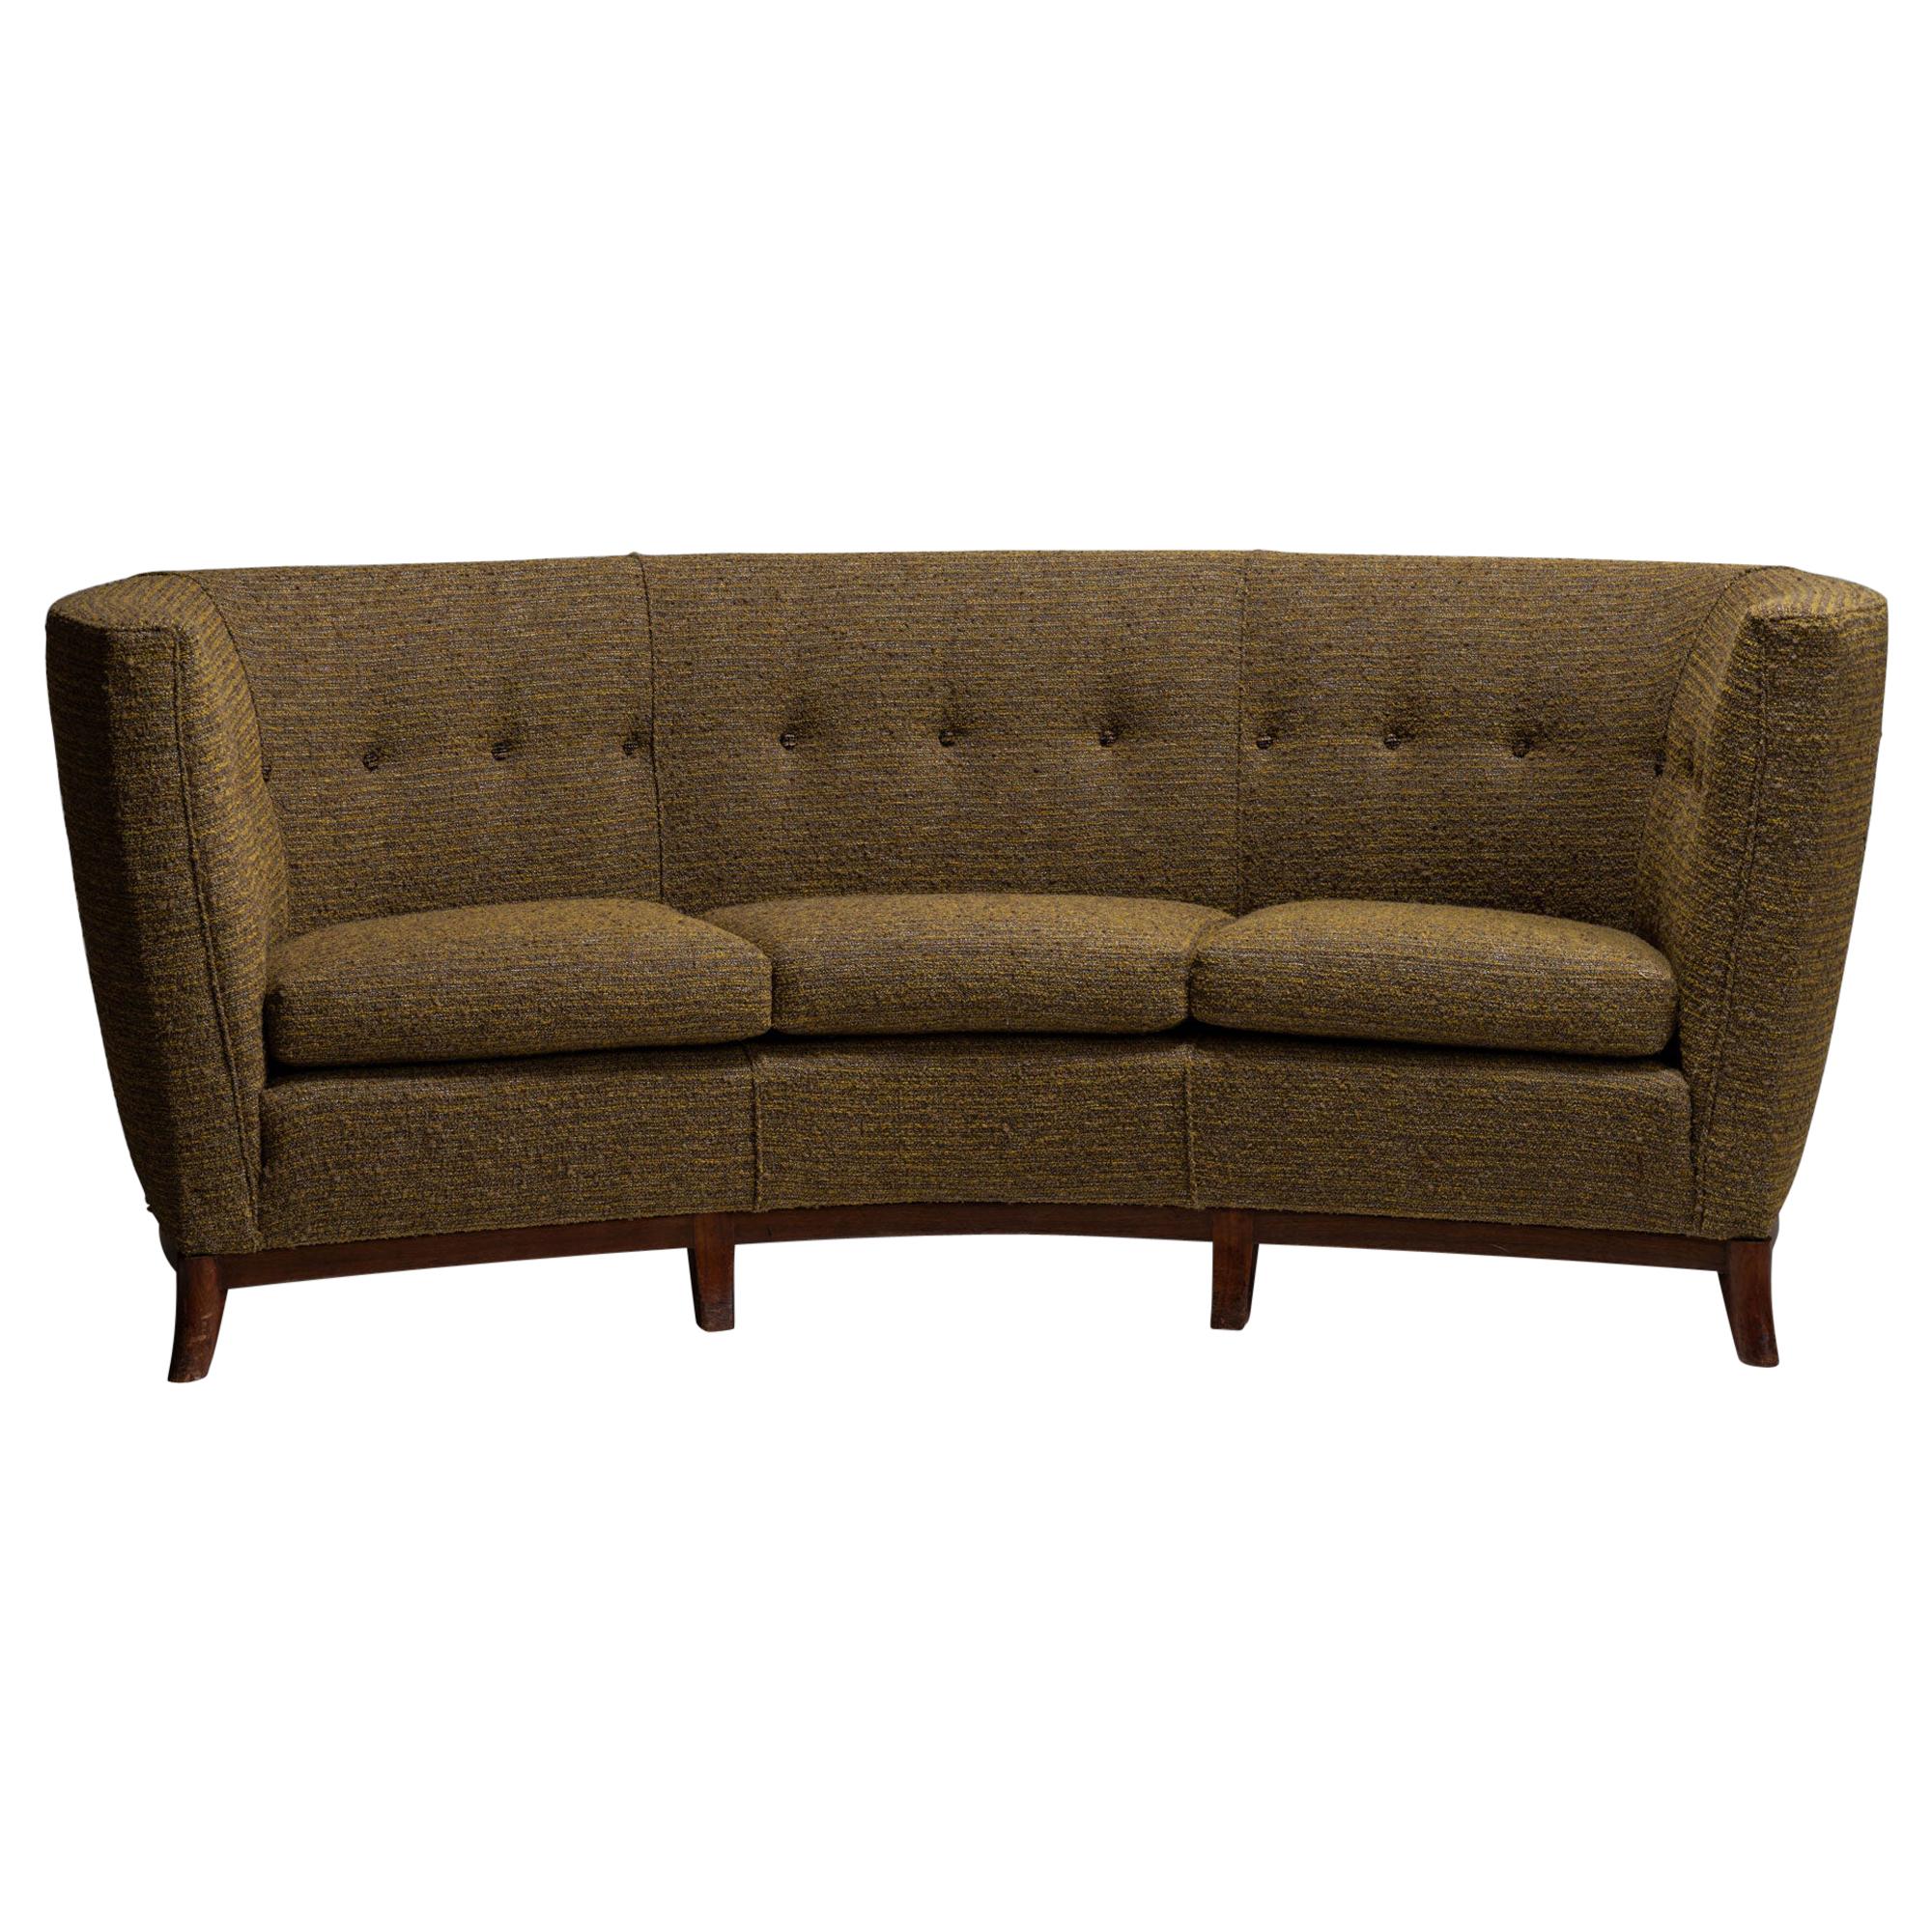 Curved Sofa in Wool Blend from Pierre Frey